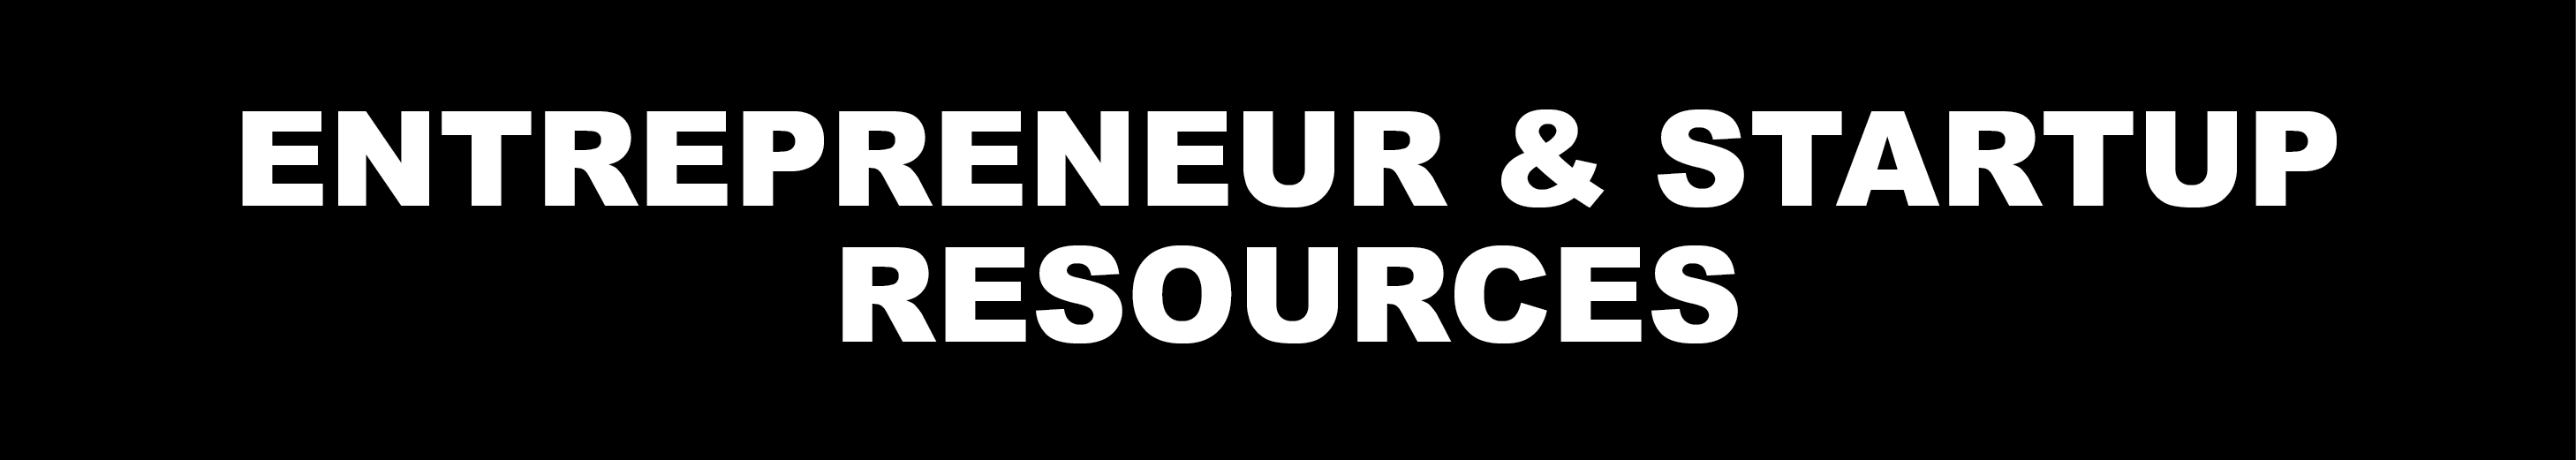 entrepreneur and startup resources-01